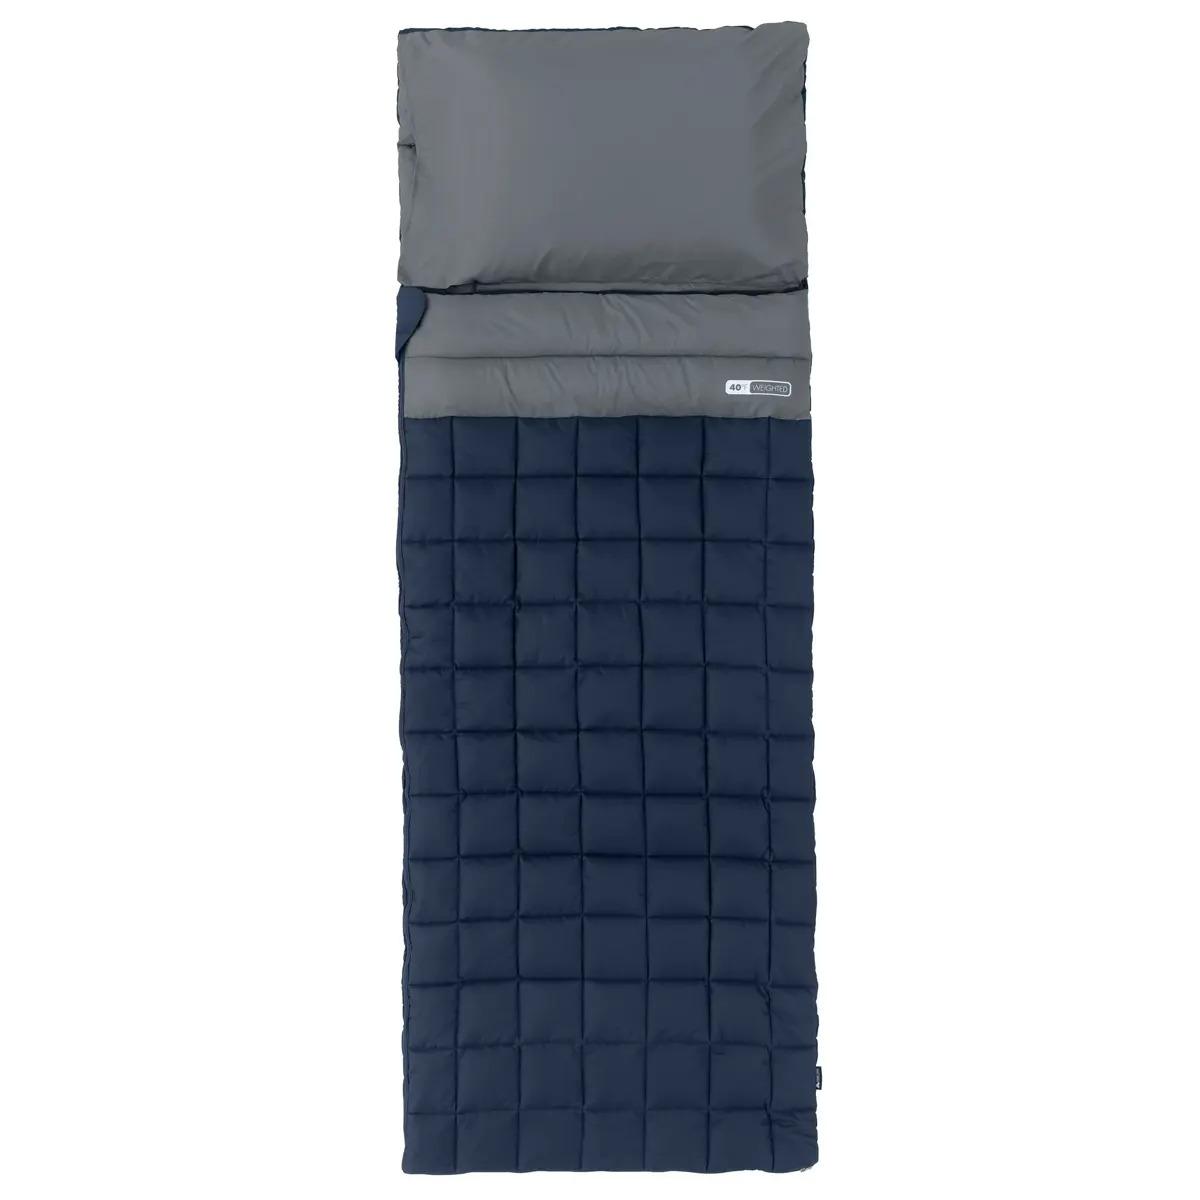 Ozark Trail 40F Weighted Camping Sleeping Bag for $24.97